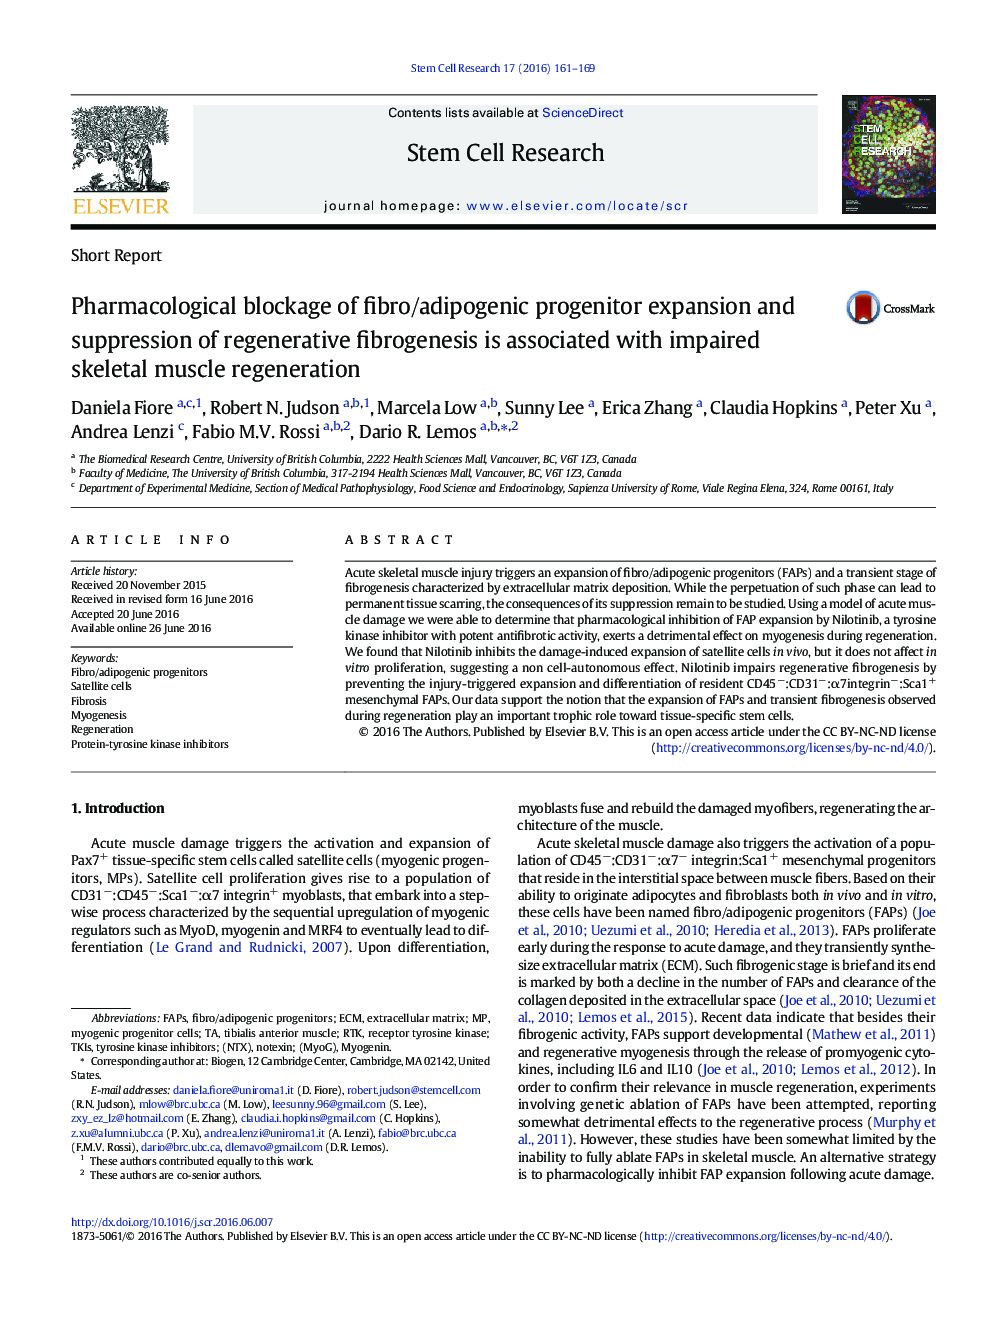 Pharmacological blockage of fibro/adipogenic progenitor expansion and suppression of regenerative fibrogenesis is associated with impaired skeletal muscle regeneration